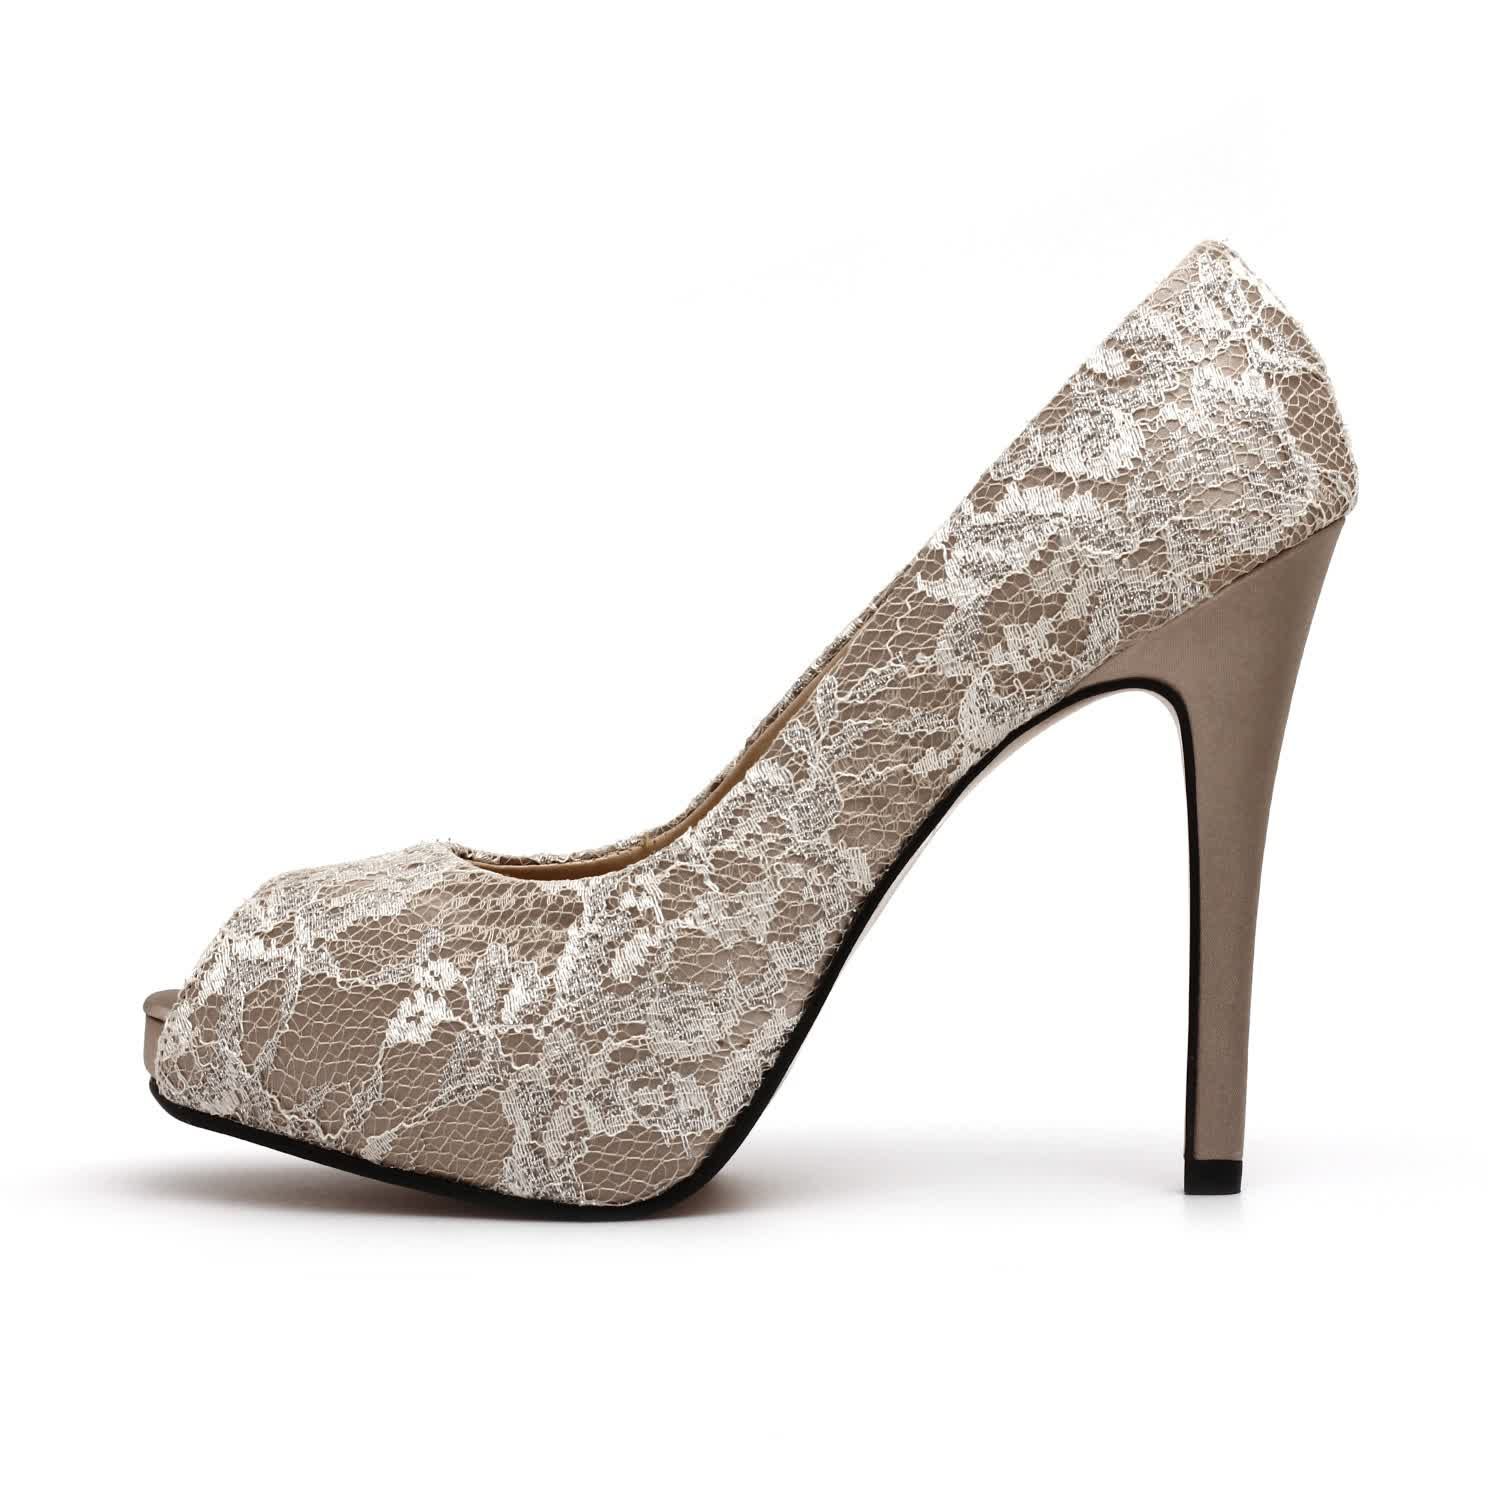 The Beautiful Champagne Colored Wedding Shoes Design To Wear As Your ...